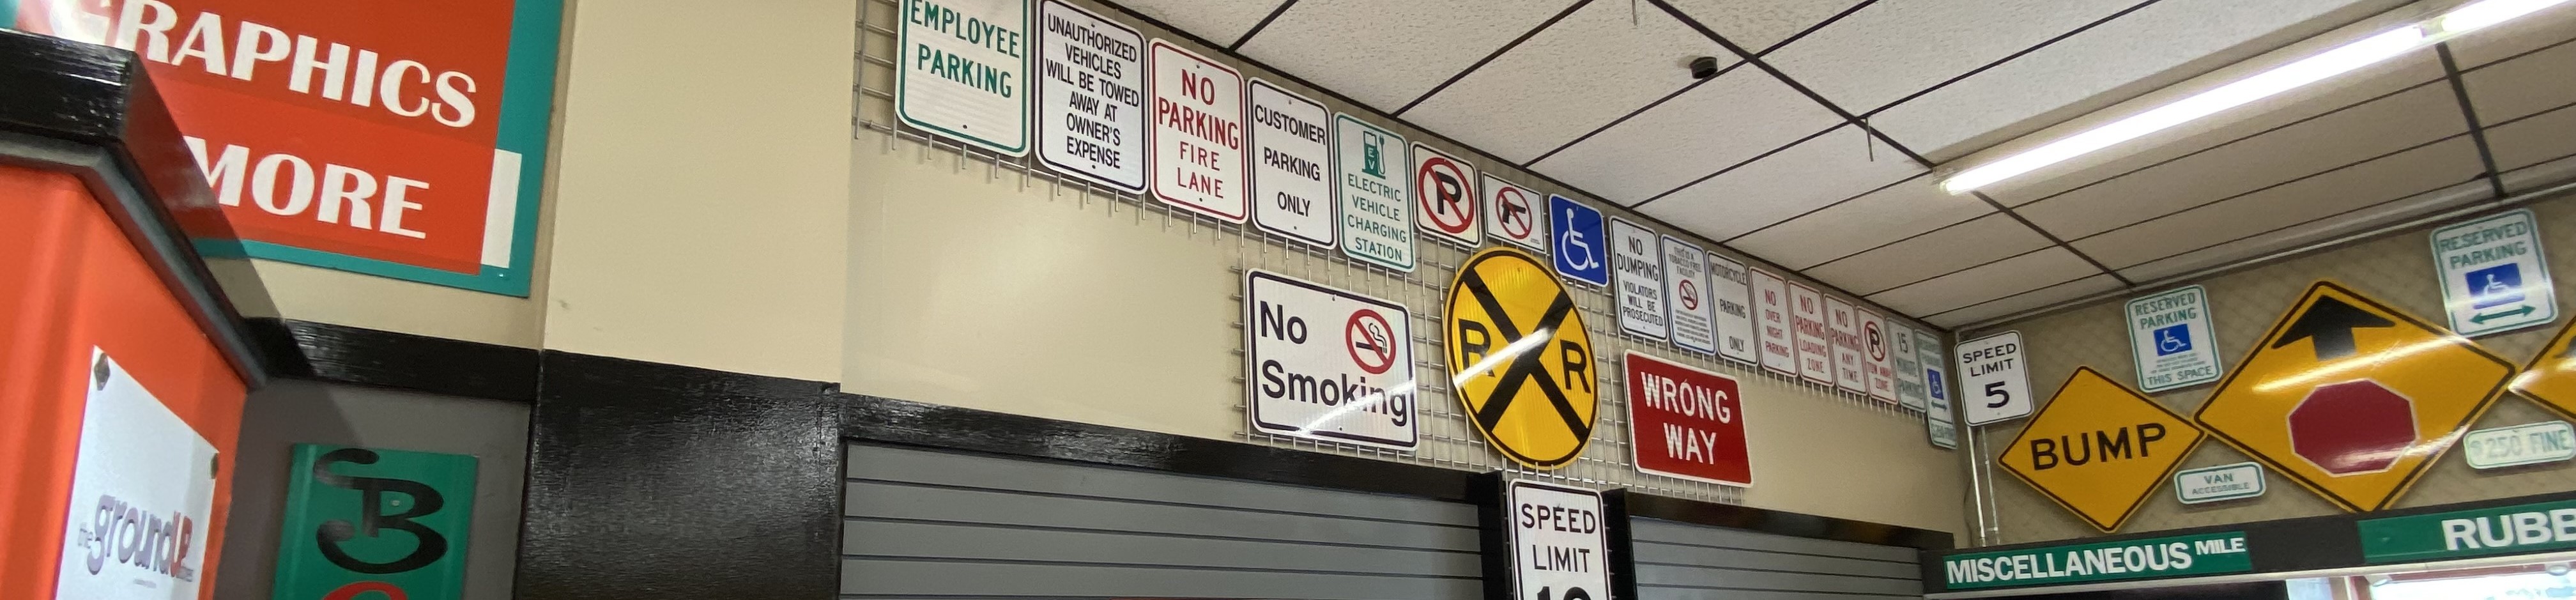 Parking Signs